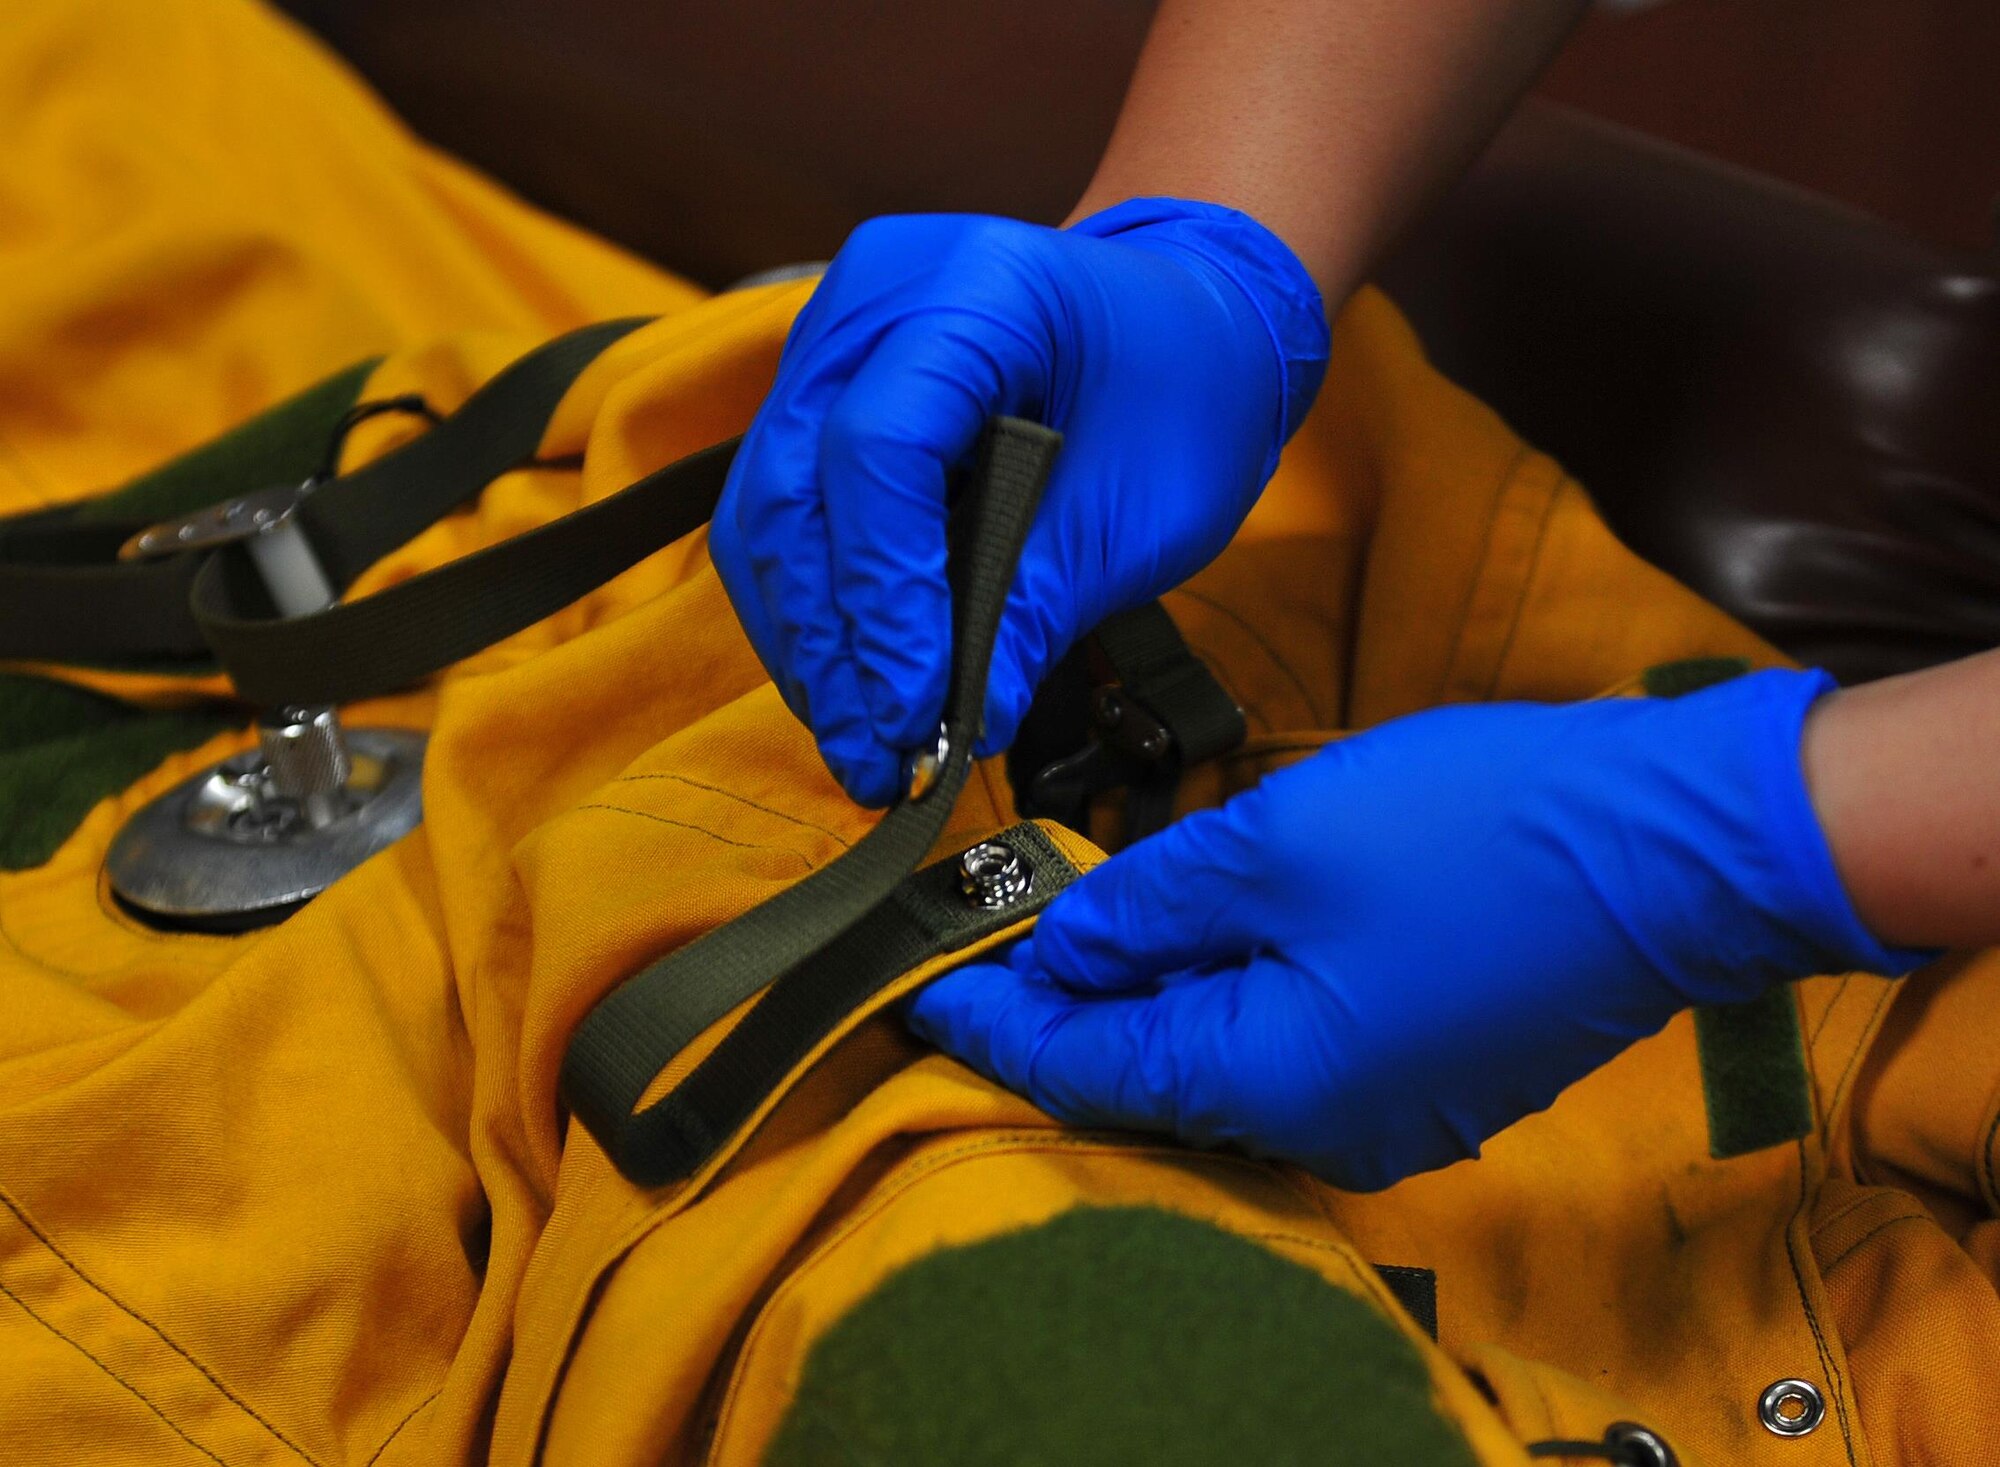 A 99th Expeditionary Reconnaissance Squadron physiological support technician closes a button clasp on a full-pressure suit at an undisclosed location in Southwest Asia, Dec. 22, 2015. Technicians inspect the suits, fastening all their buttons and Velcro patches to prevent the suit’s material from fraying after taking them off pilots. (U.S. Air Force photo by Staff Sgt. Kentavist P. Brackin/released)